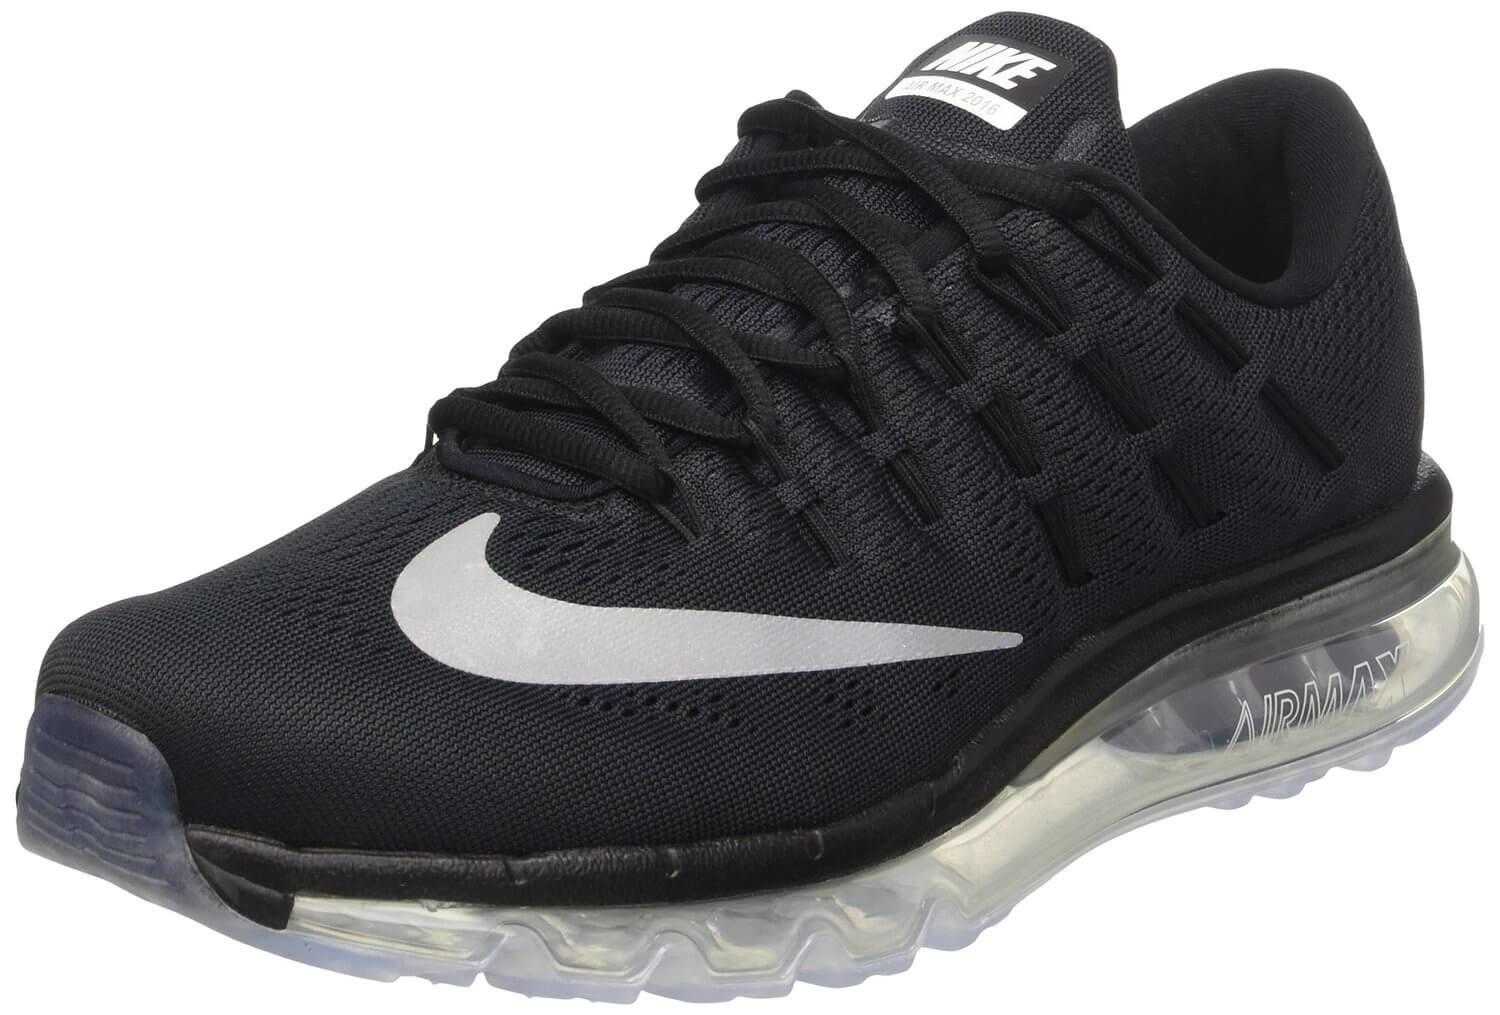 With a simplistic design, the Nike Air Max 2016 is still a very stylish shoe.